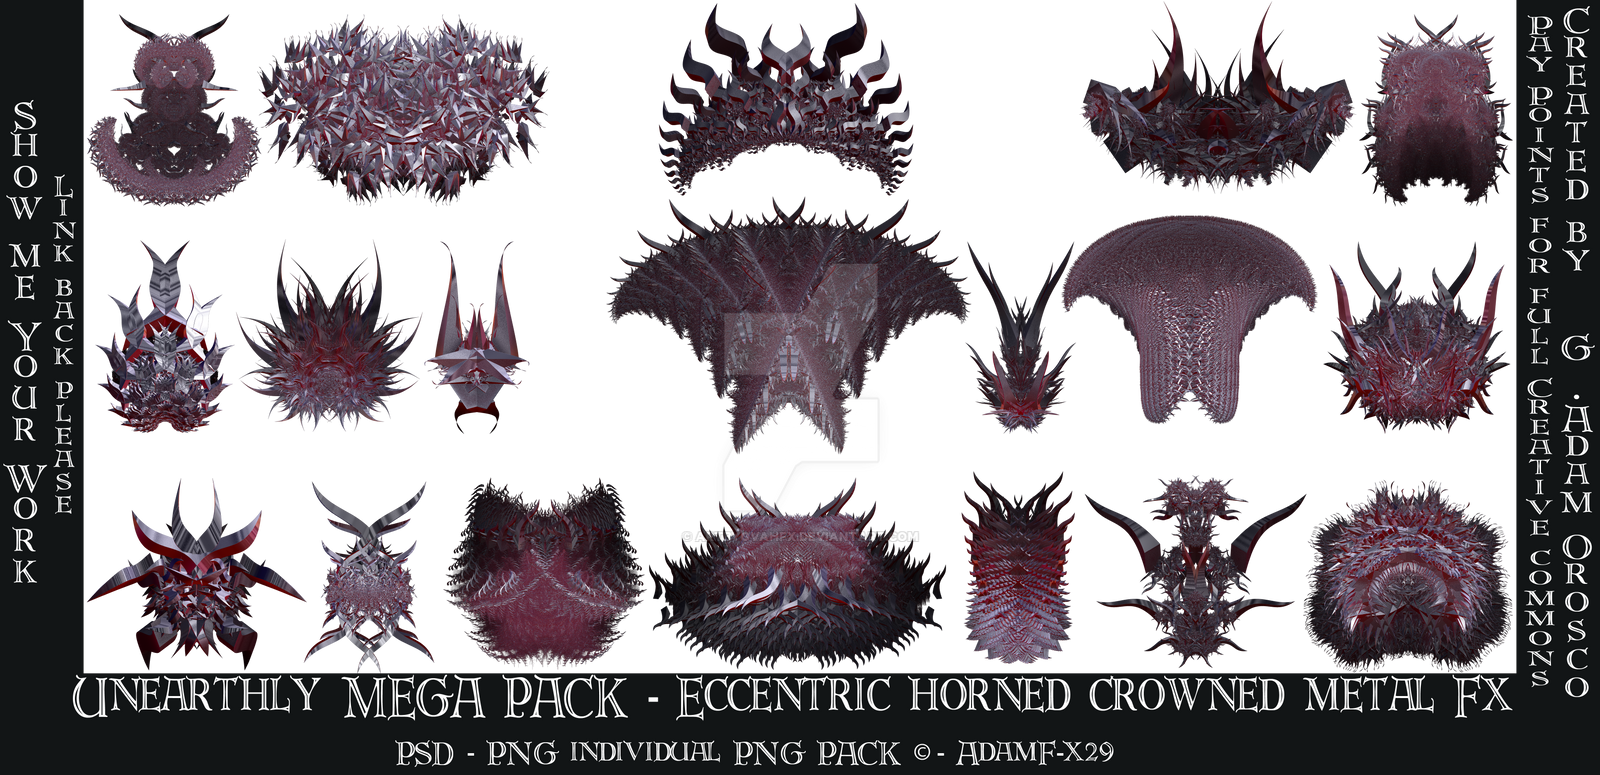 Mega Pack - Unearthly Eccentric Horned Crowned Met by ArtbyOvahFx on ...